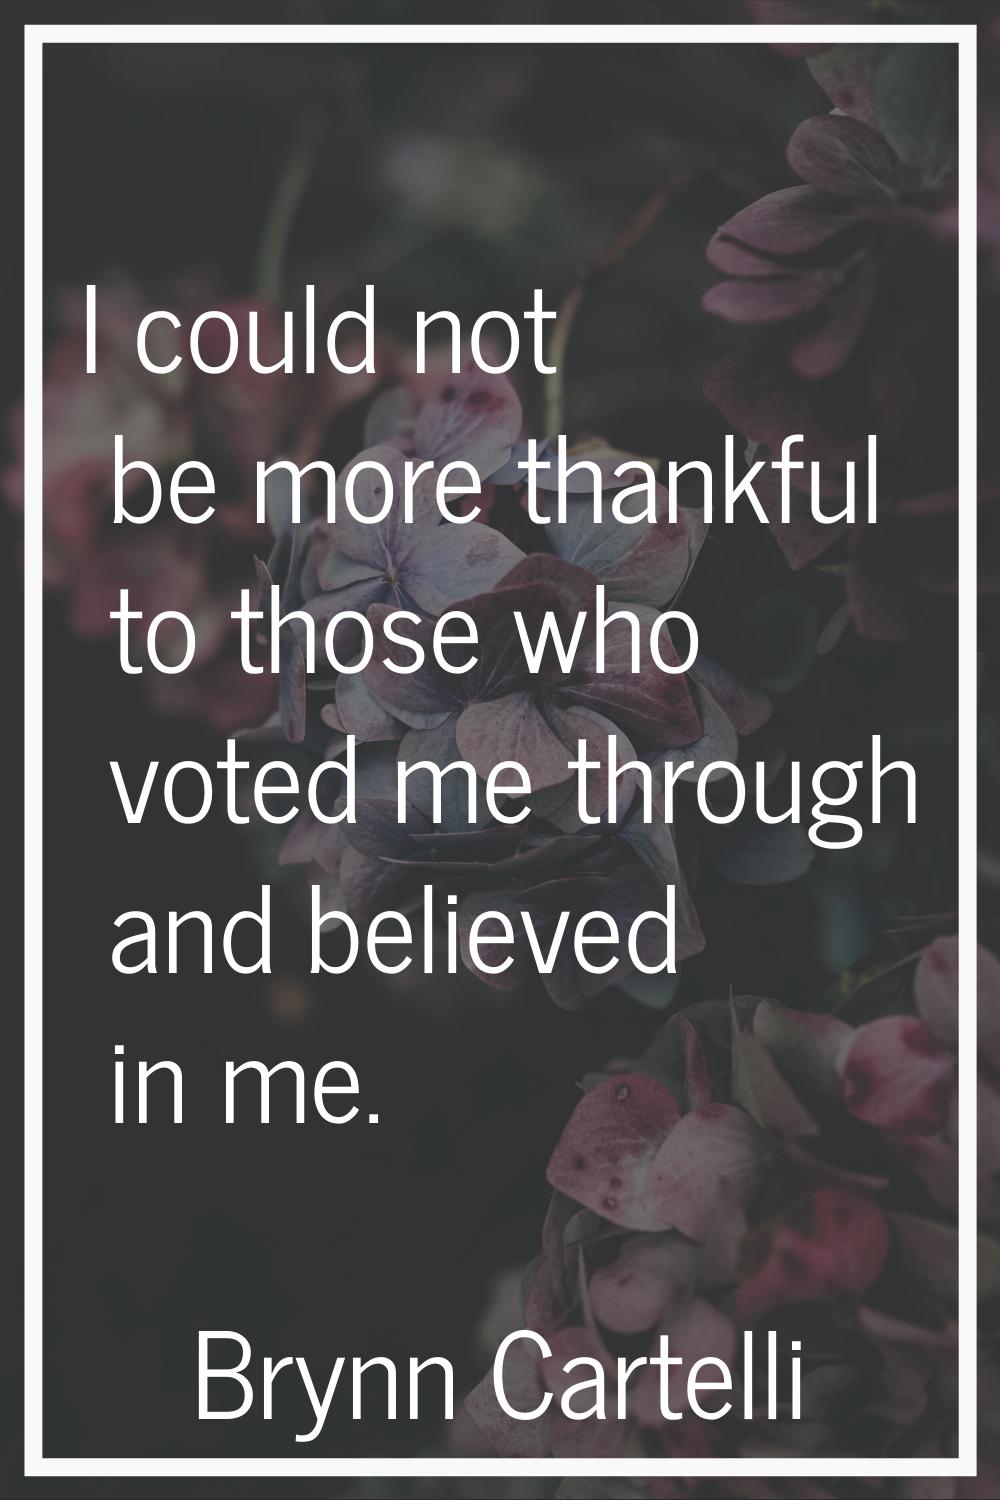 I could not be more thankful to those who voted me through and believed in me.